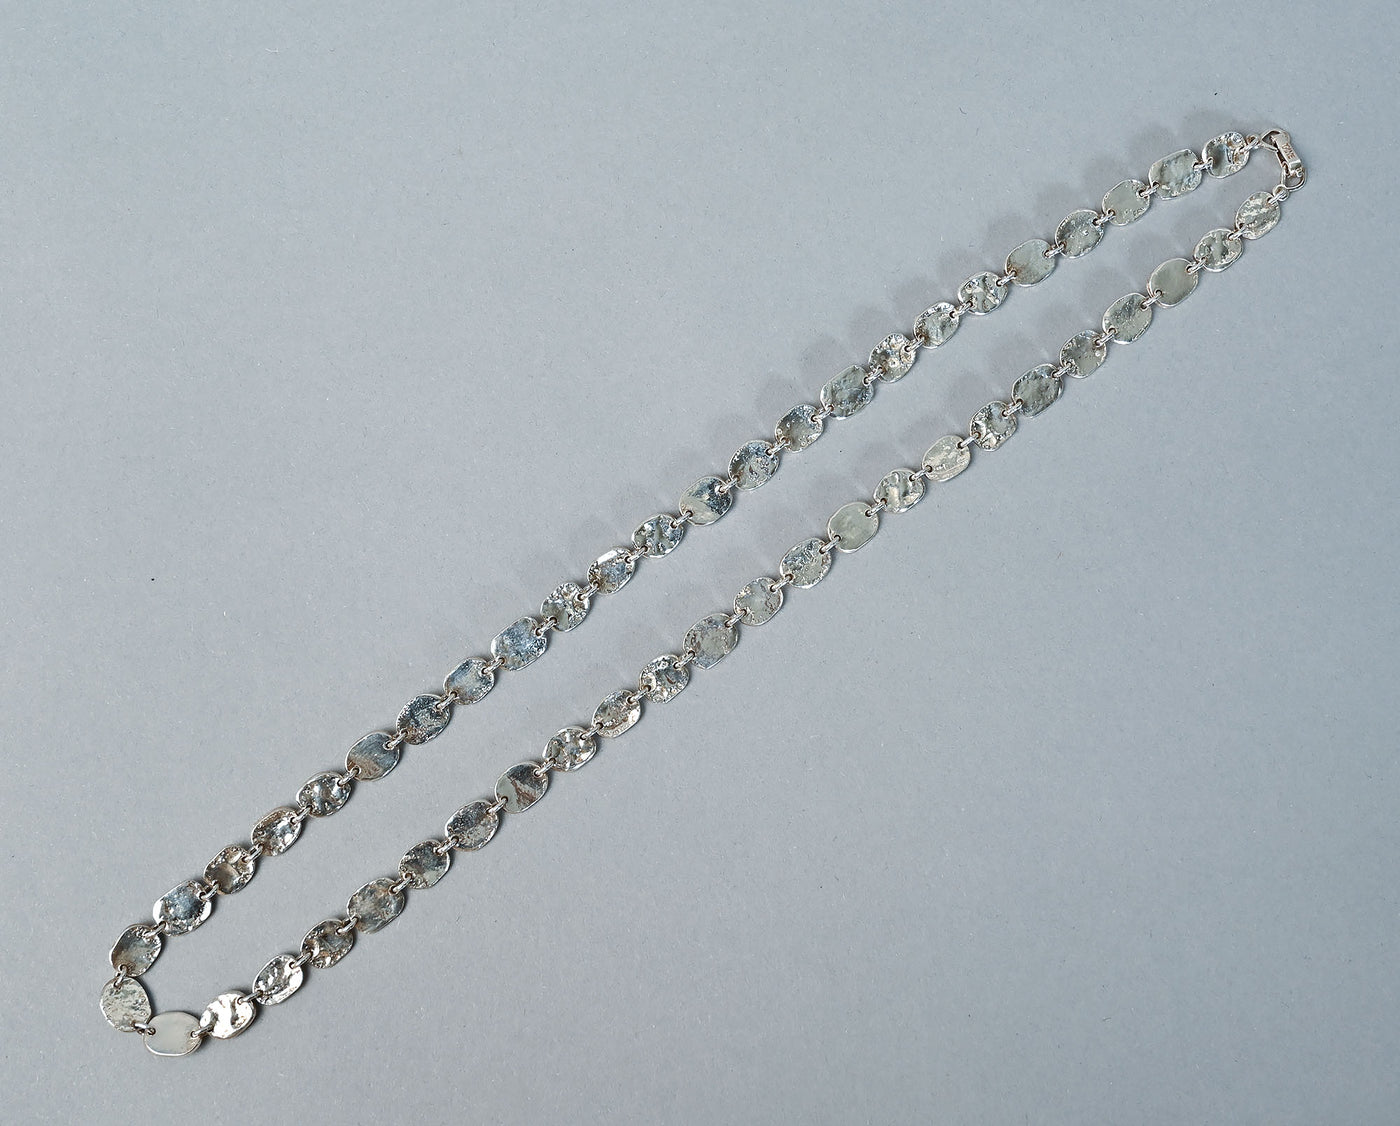 Backside top view of Tane Oval Silver Links Necklace with clasp closed.